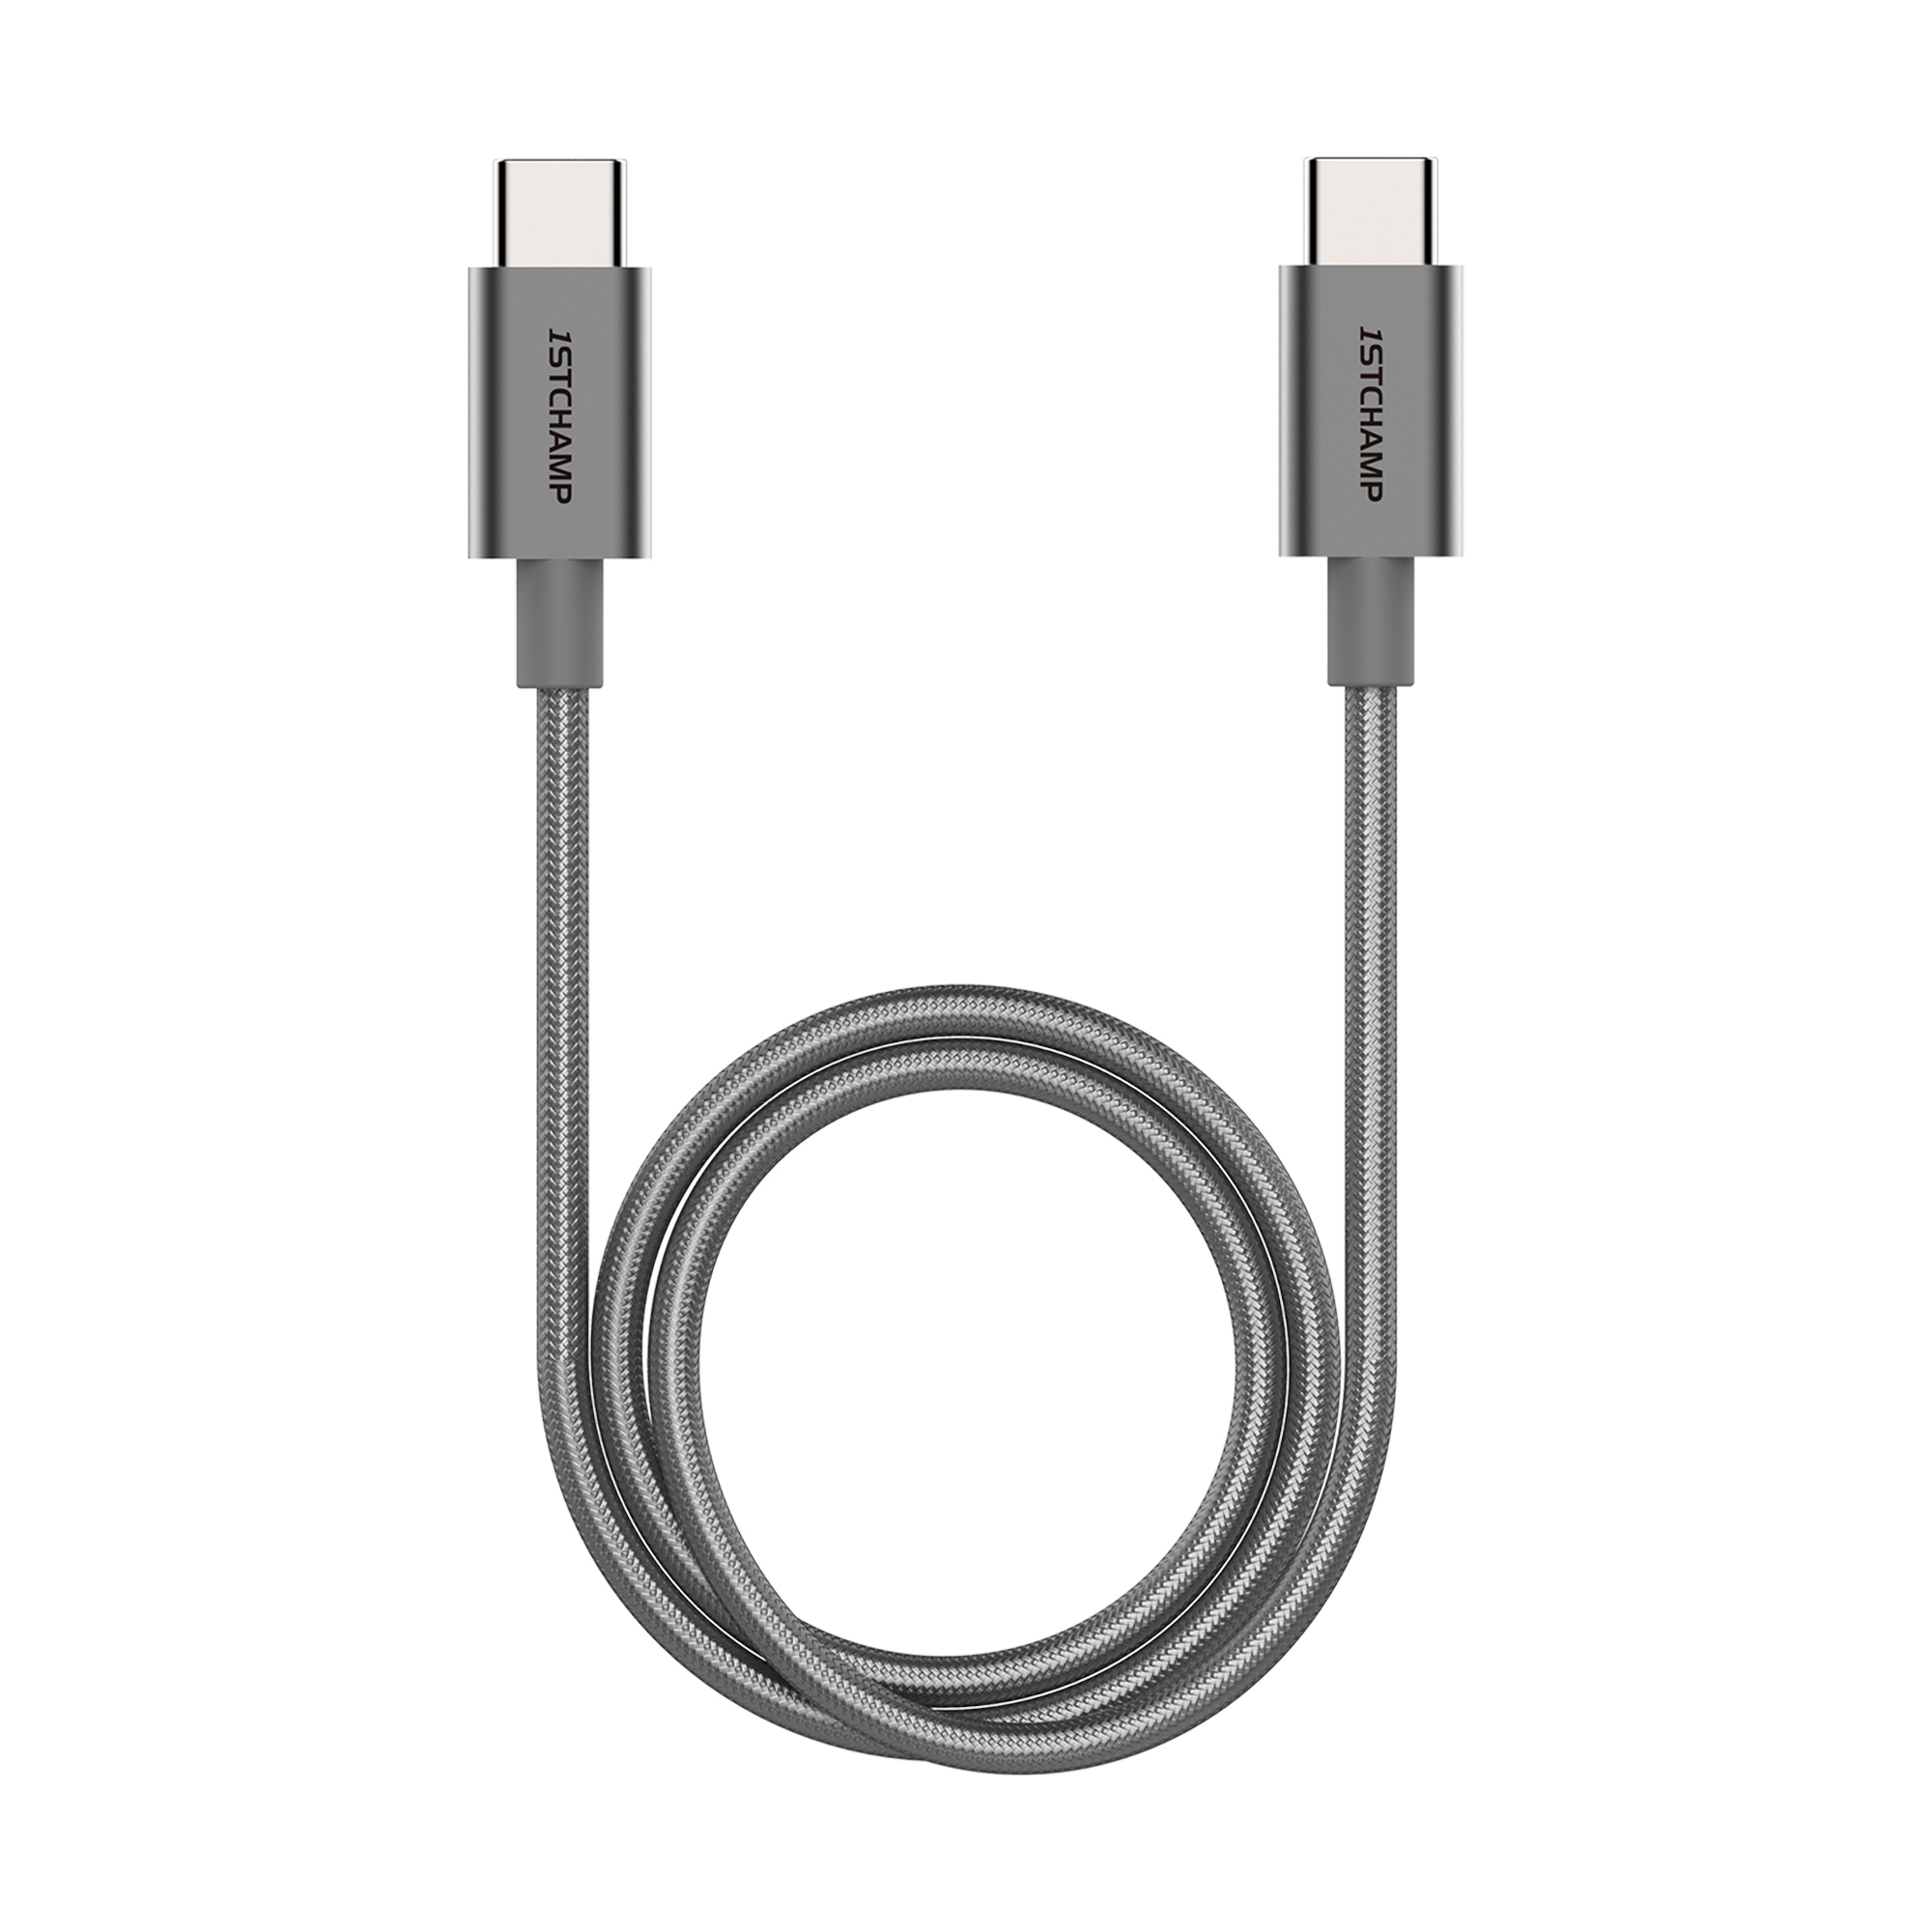 First Champion USB Type-C to Type-C Cable - Nylon Braided with Metallic Casing - 200cm - Grey